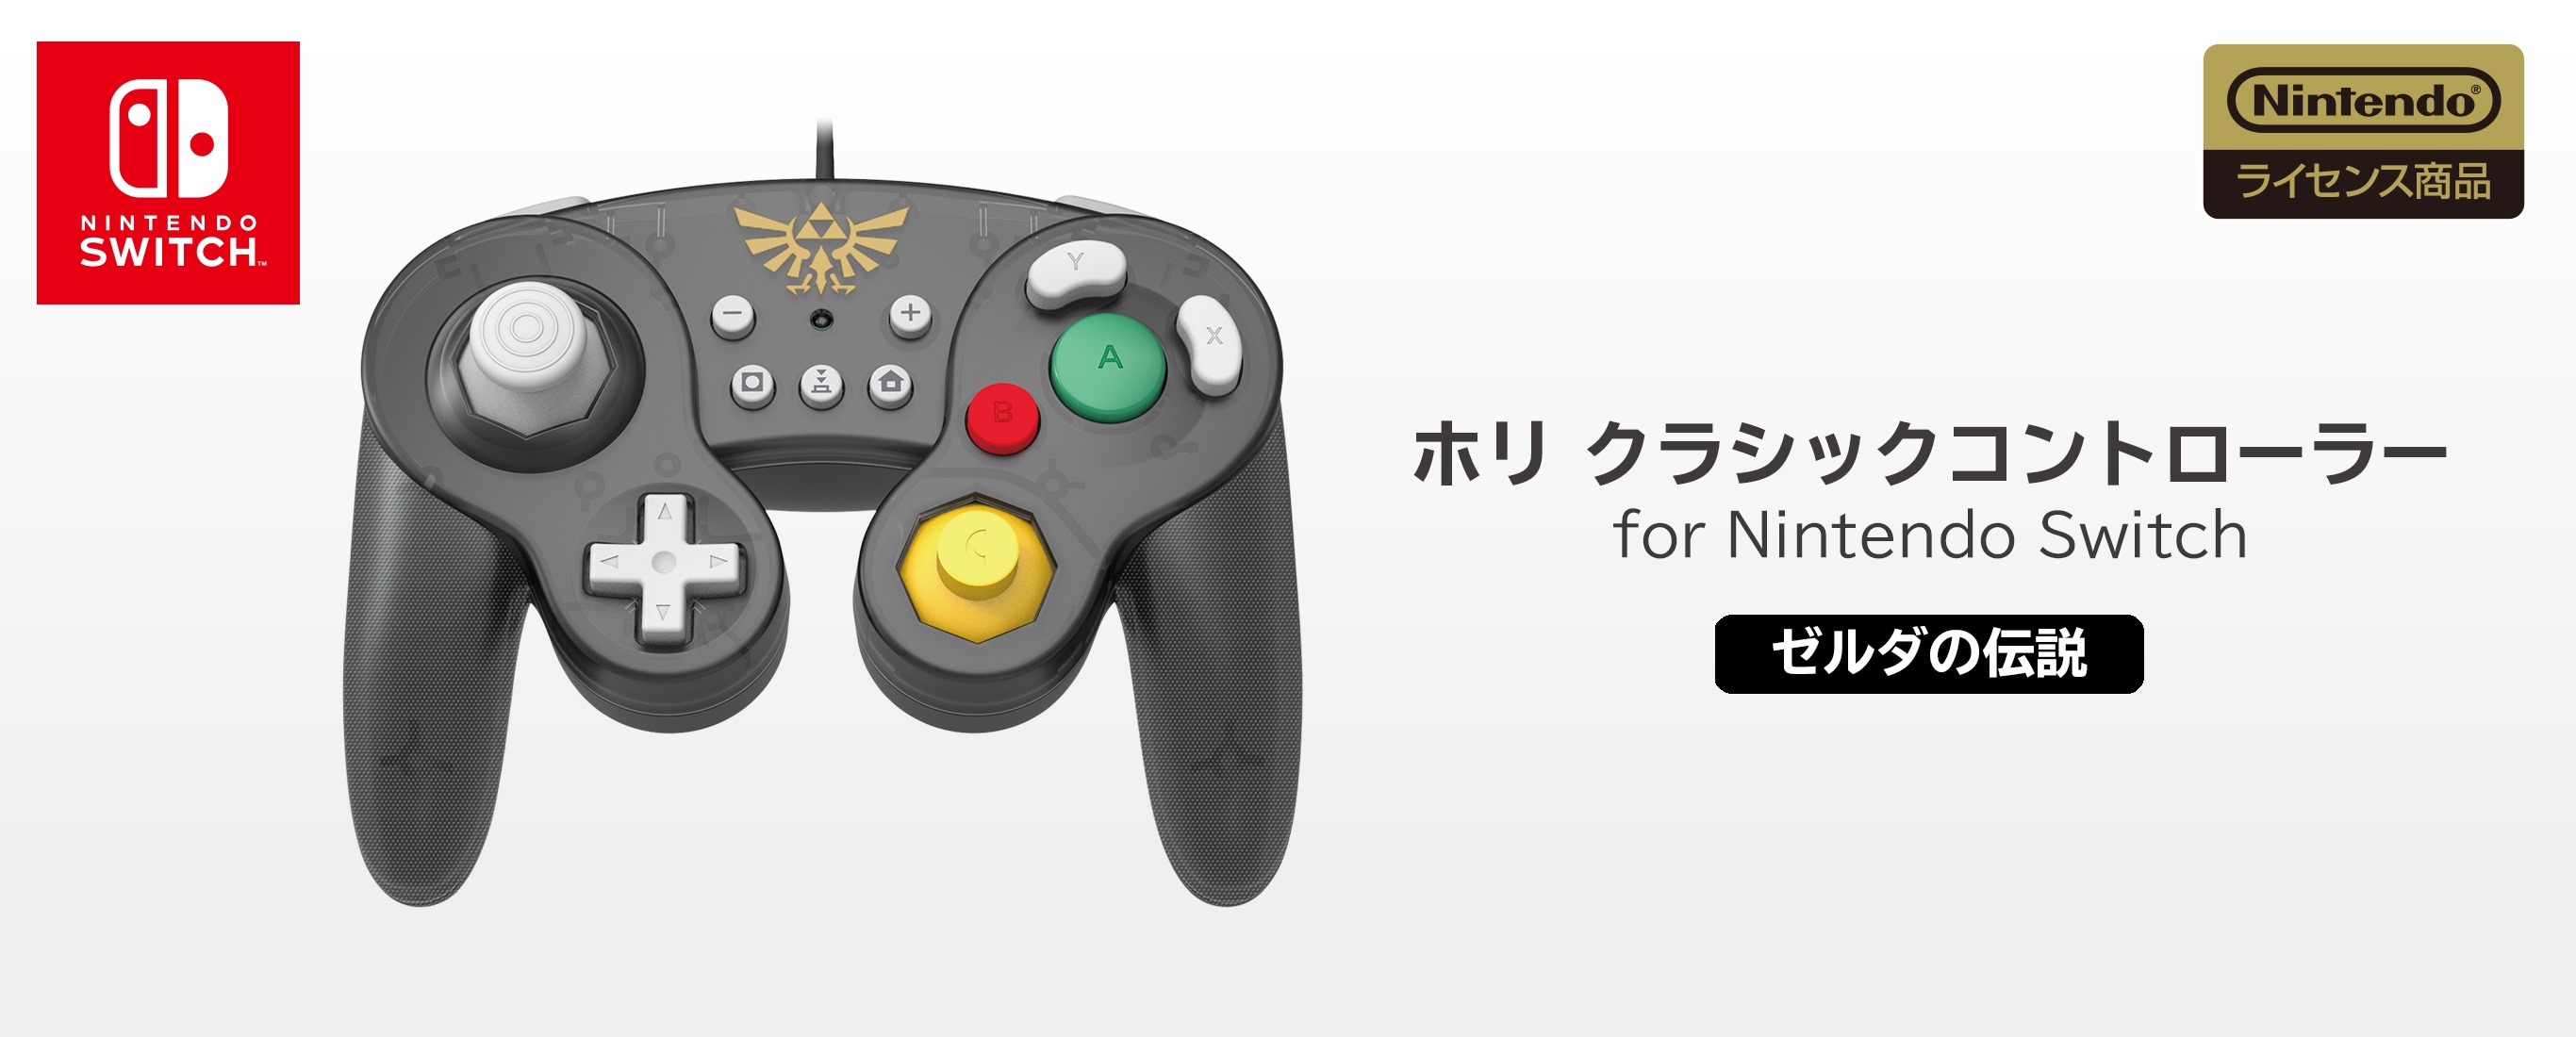 Hori To Release Controllers Classic For October Nintendo GameCube-Style Switch In Siliconera 